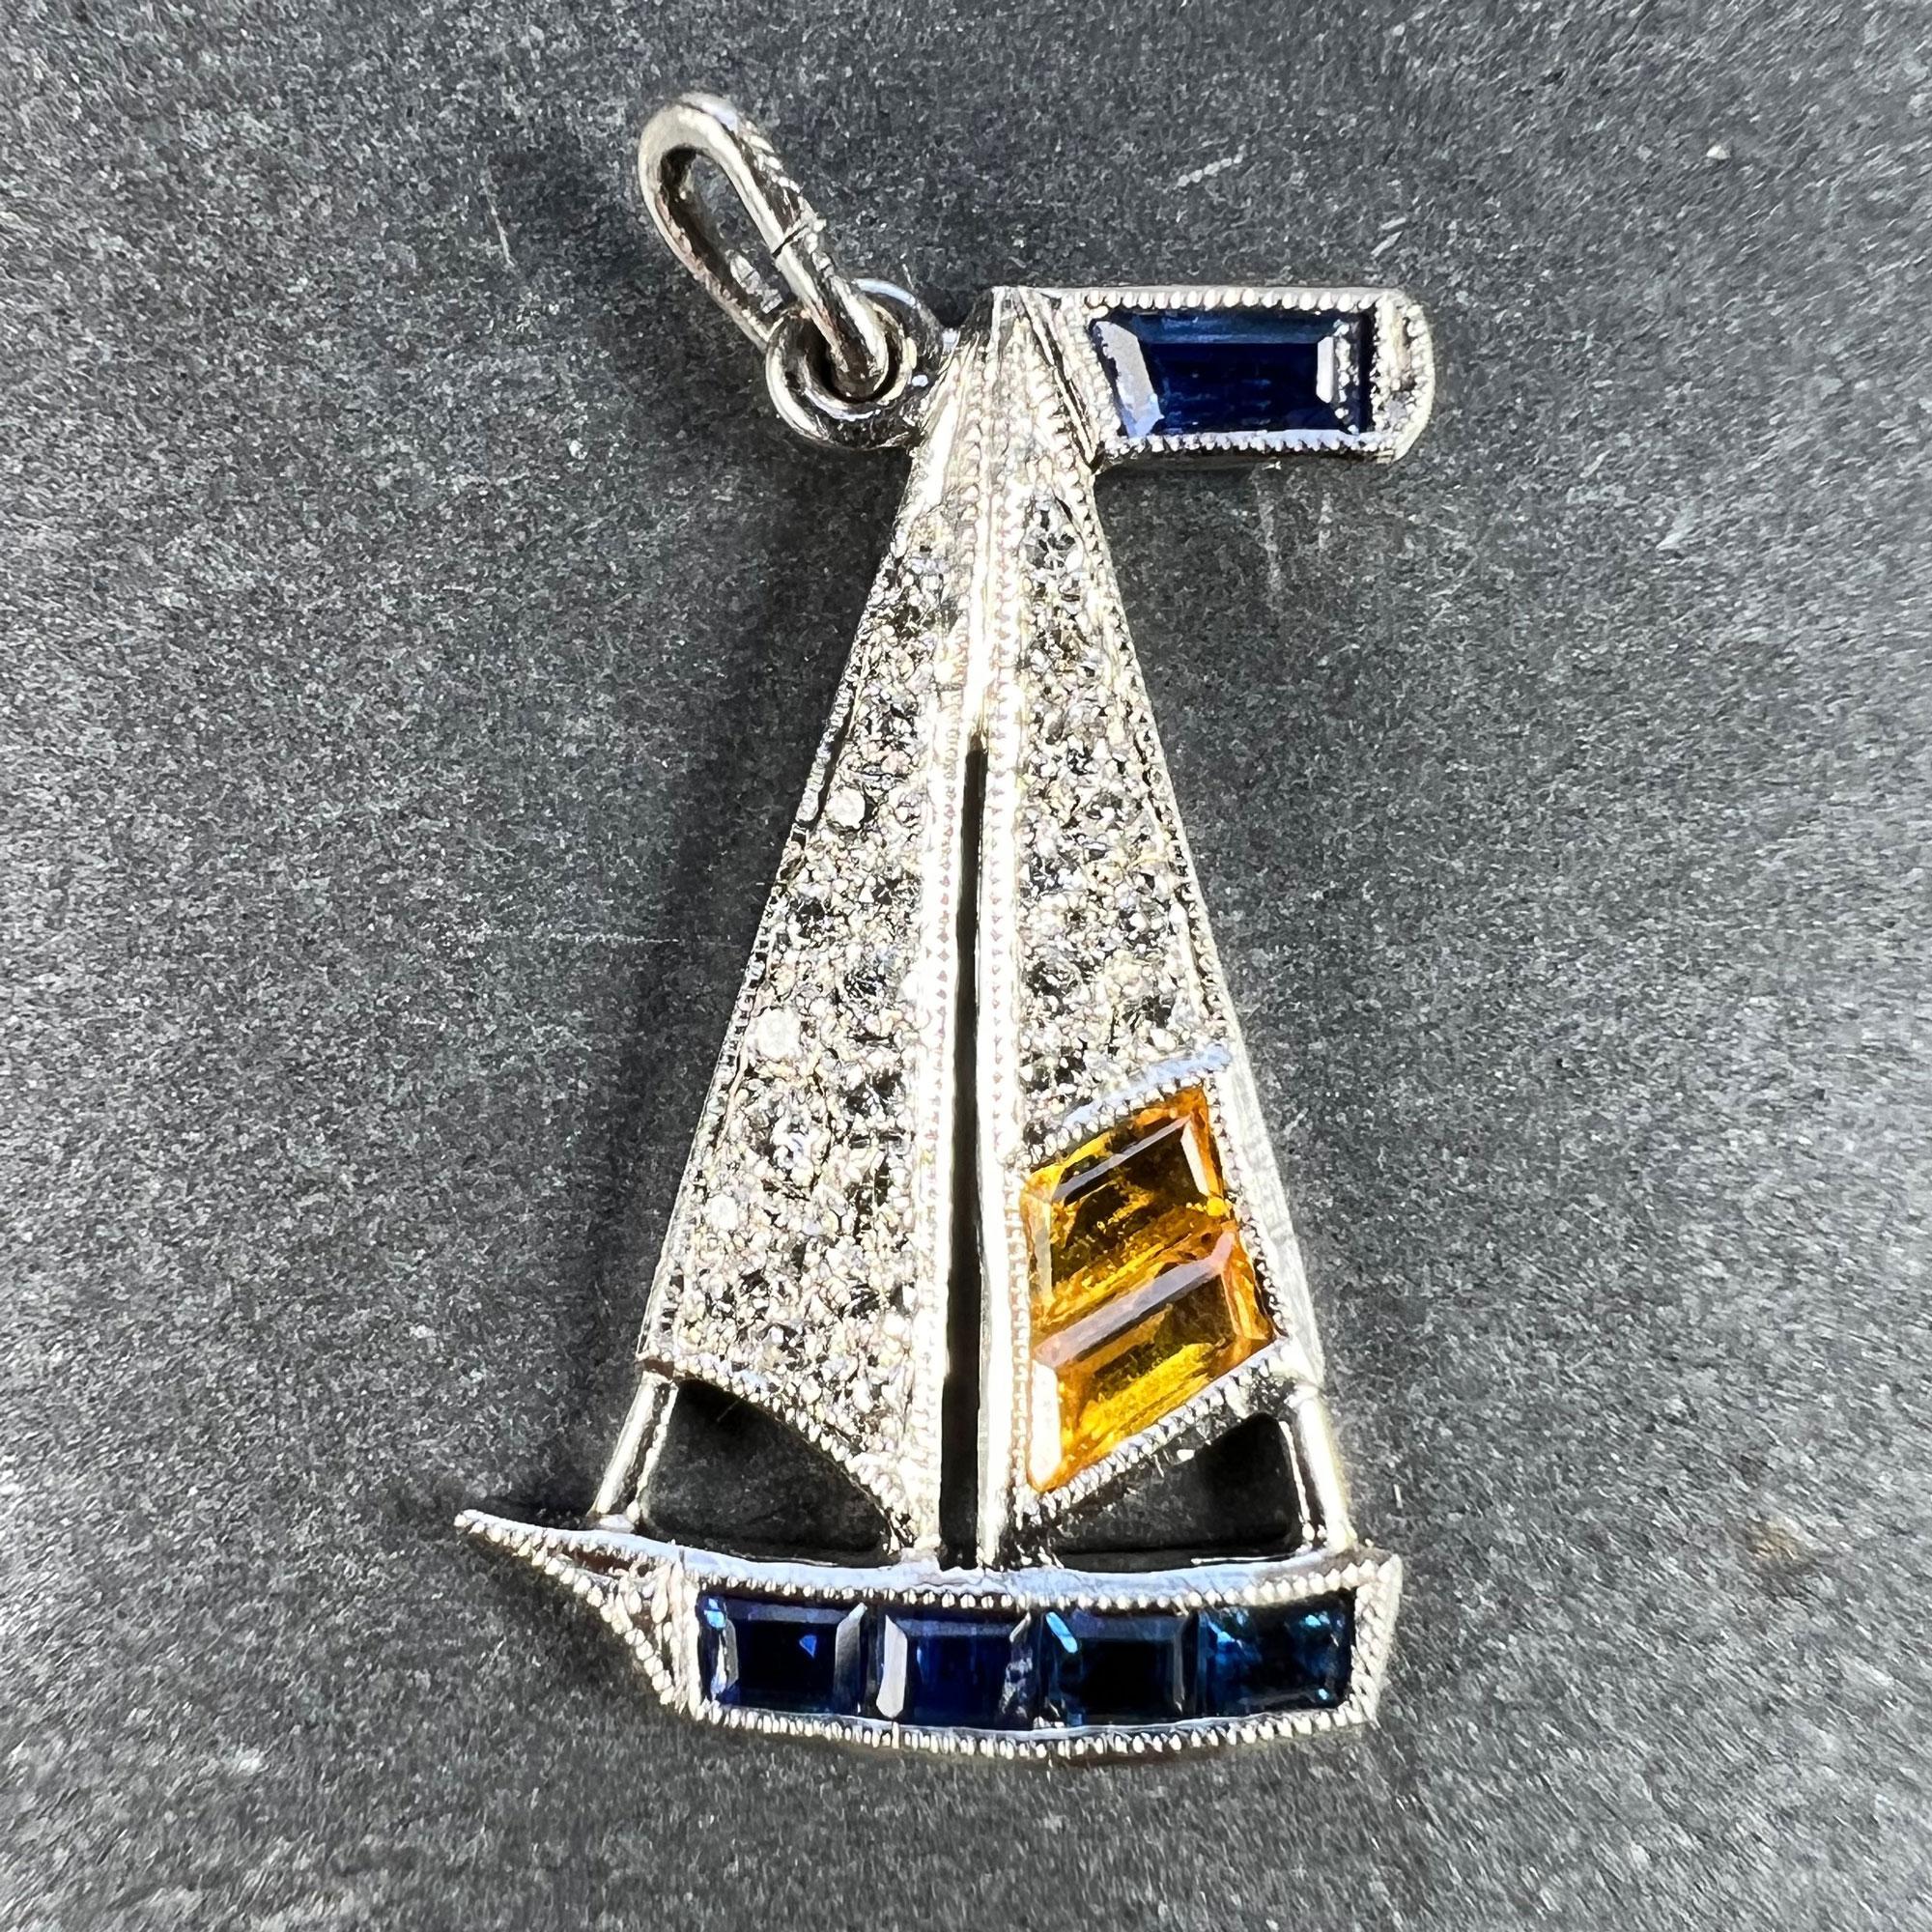 An Art Deco platinum charm pendant designed as a sailing yacht or sailboat with diamond and citrine sails on a sapphire boat. The charm is set with 25 round brilliant cut diamonds, two trap-cut citrines and five emerald-cut sapphires. Unmarked but